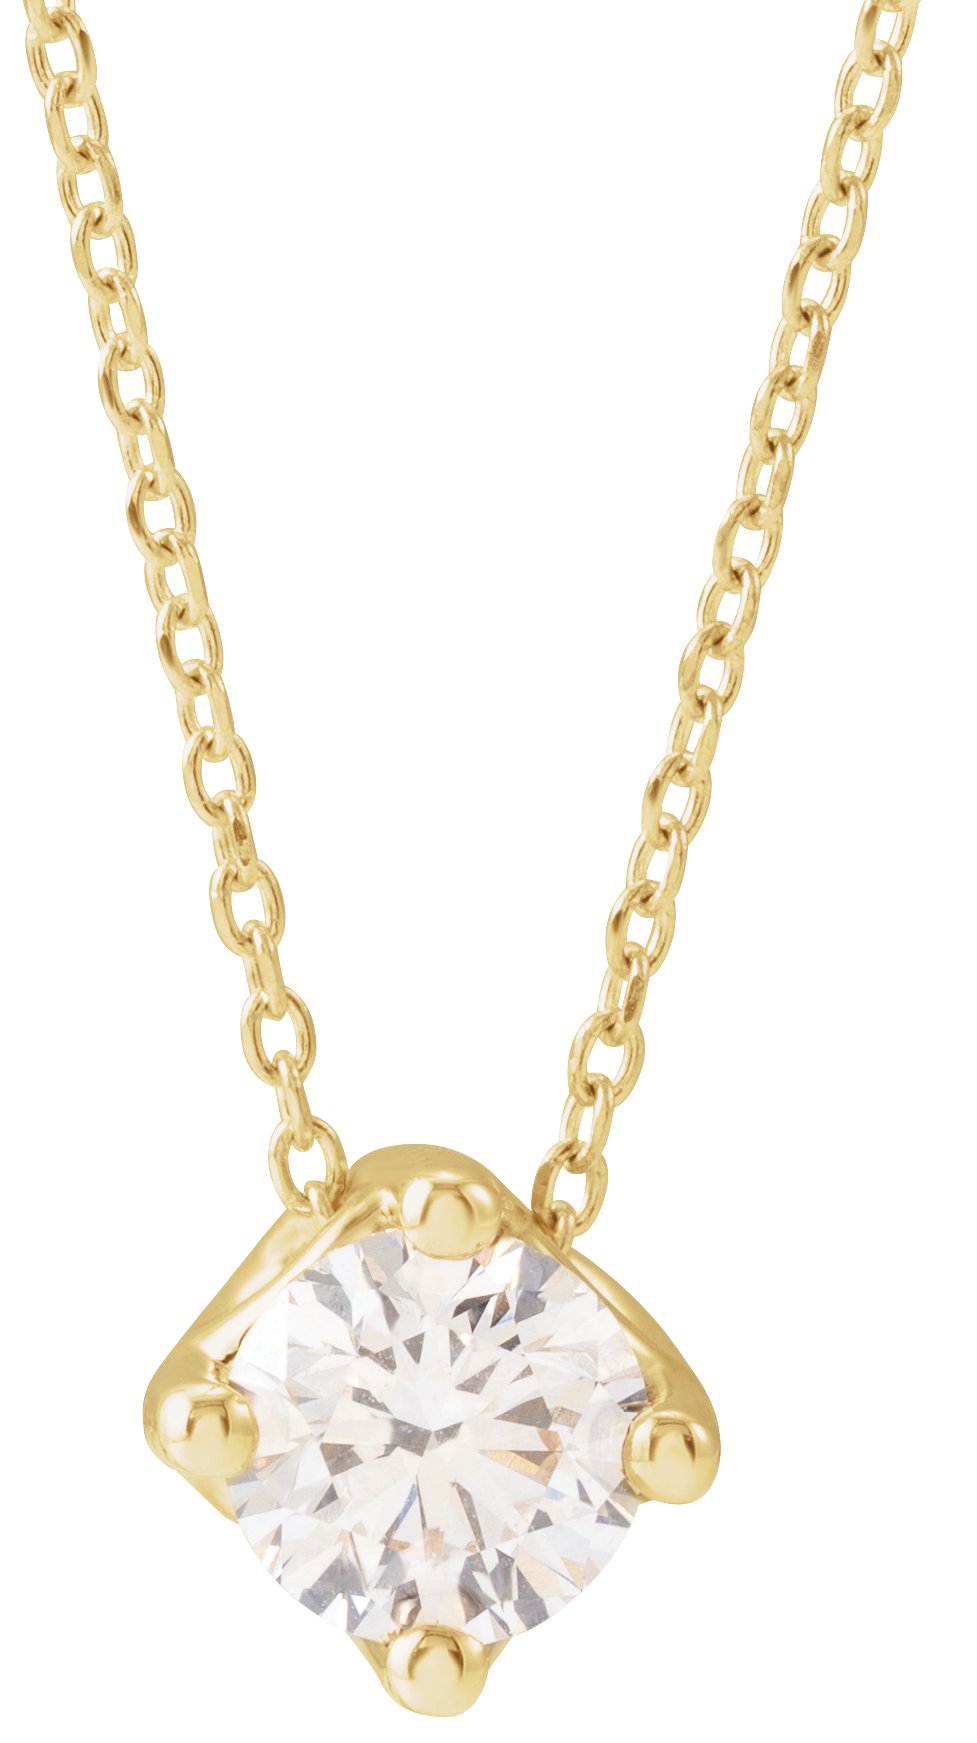 14K Yellow 3/4 CT Diamond Solitaire 16-18" Necklace